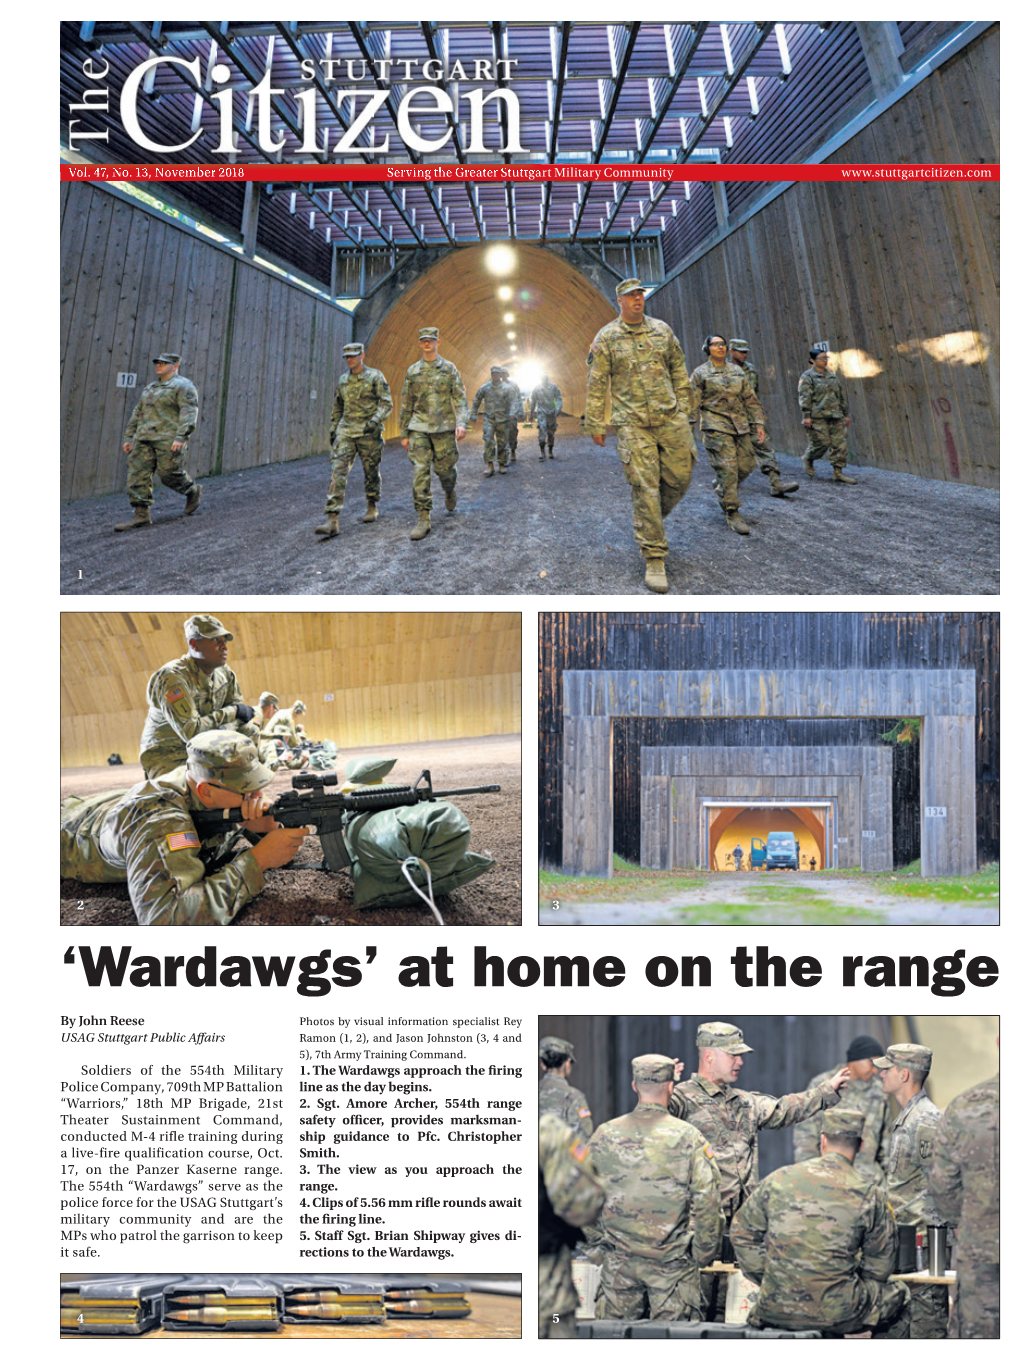 'Wardawgs' at Home on the Range